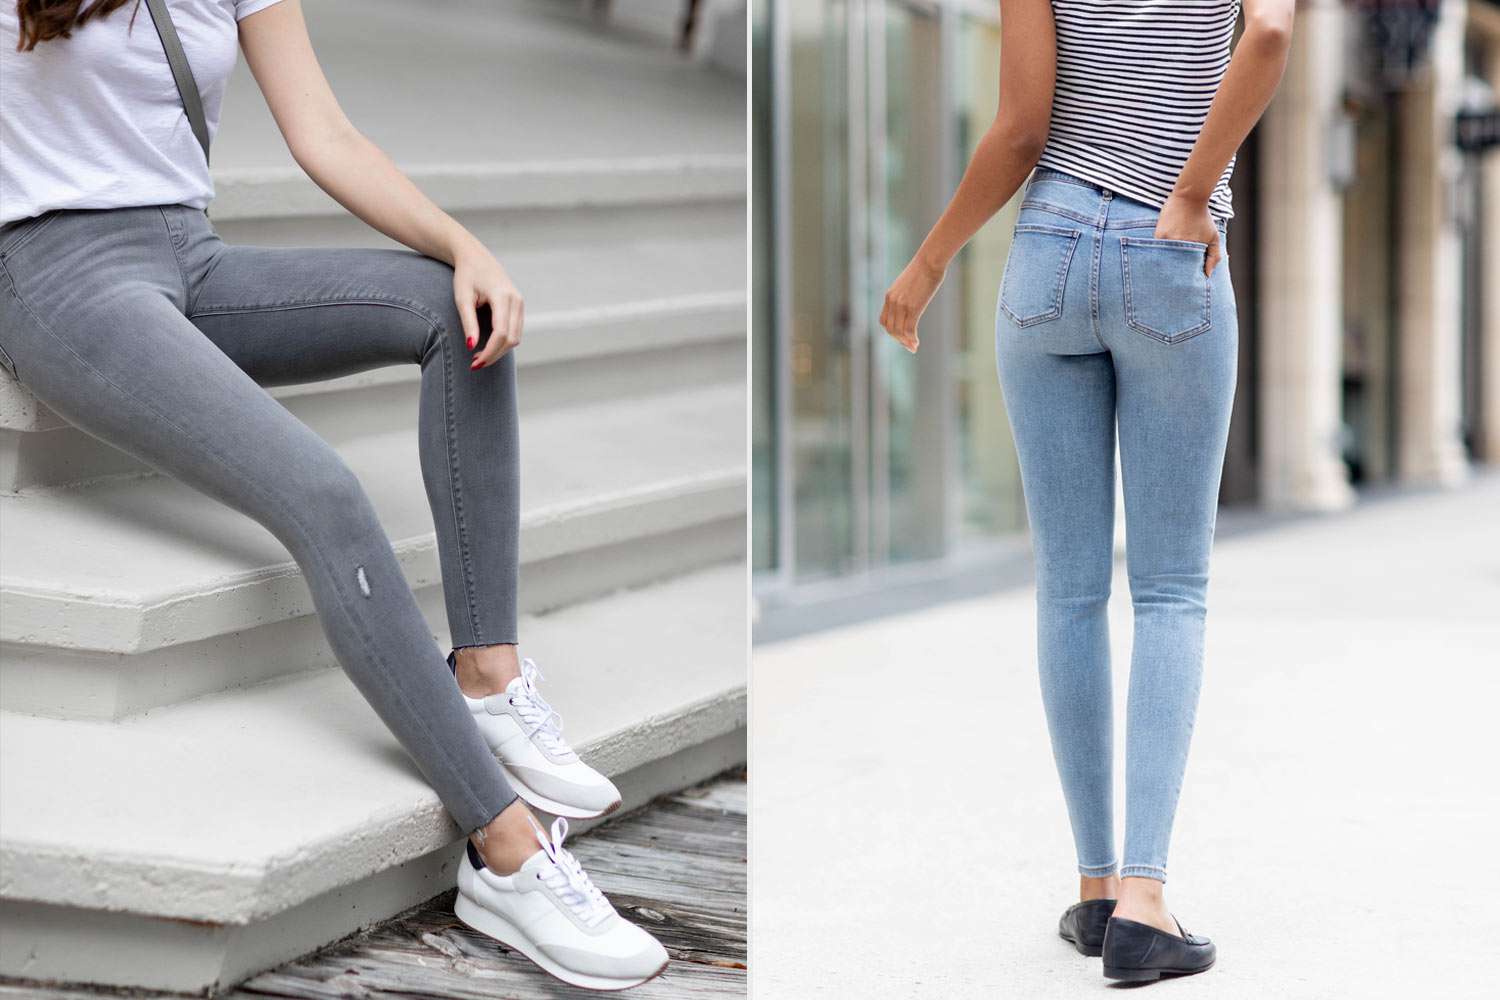 spanx under jeans before and after